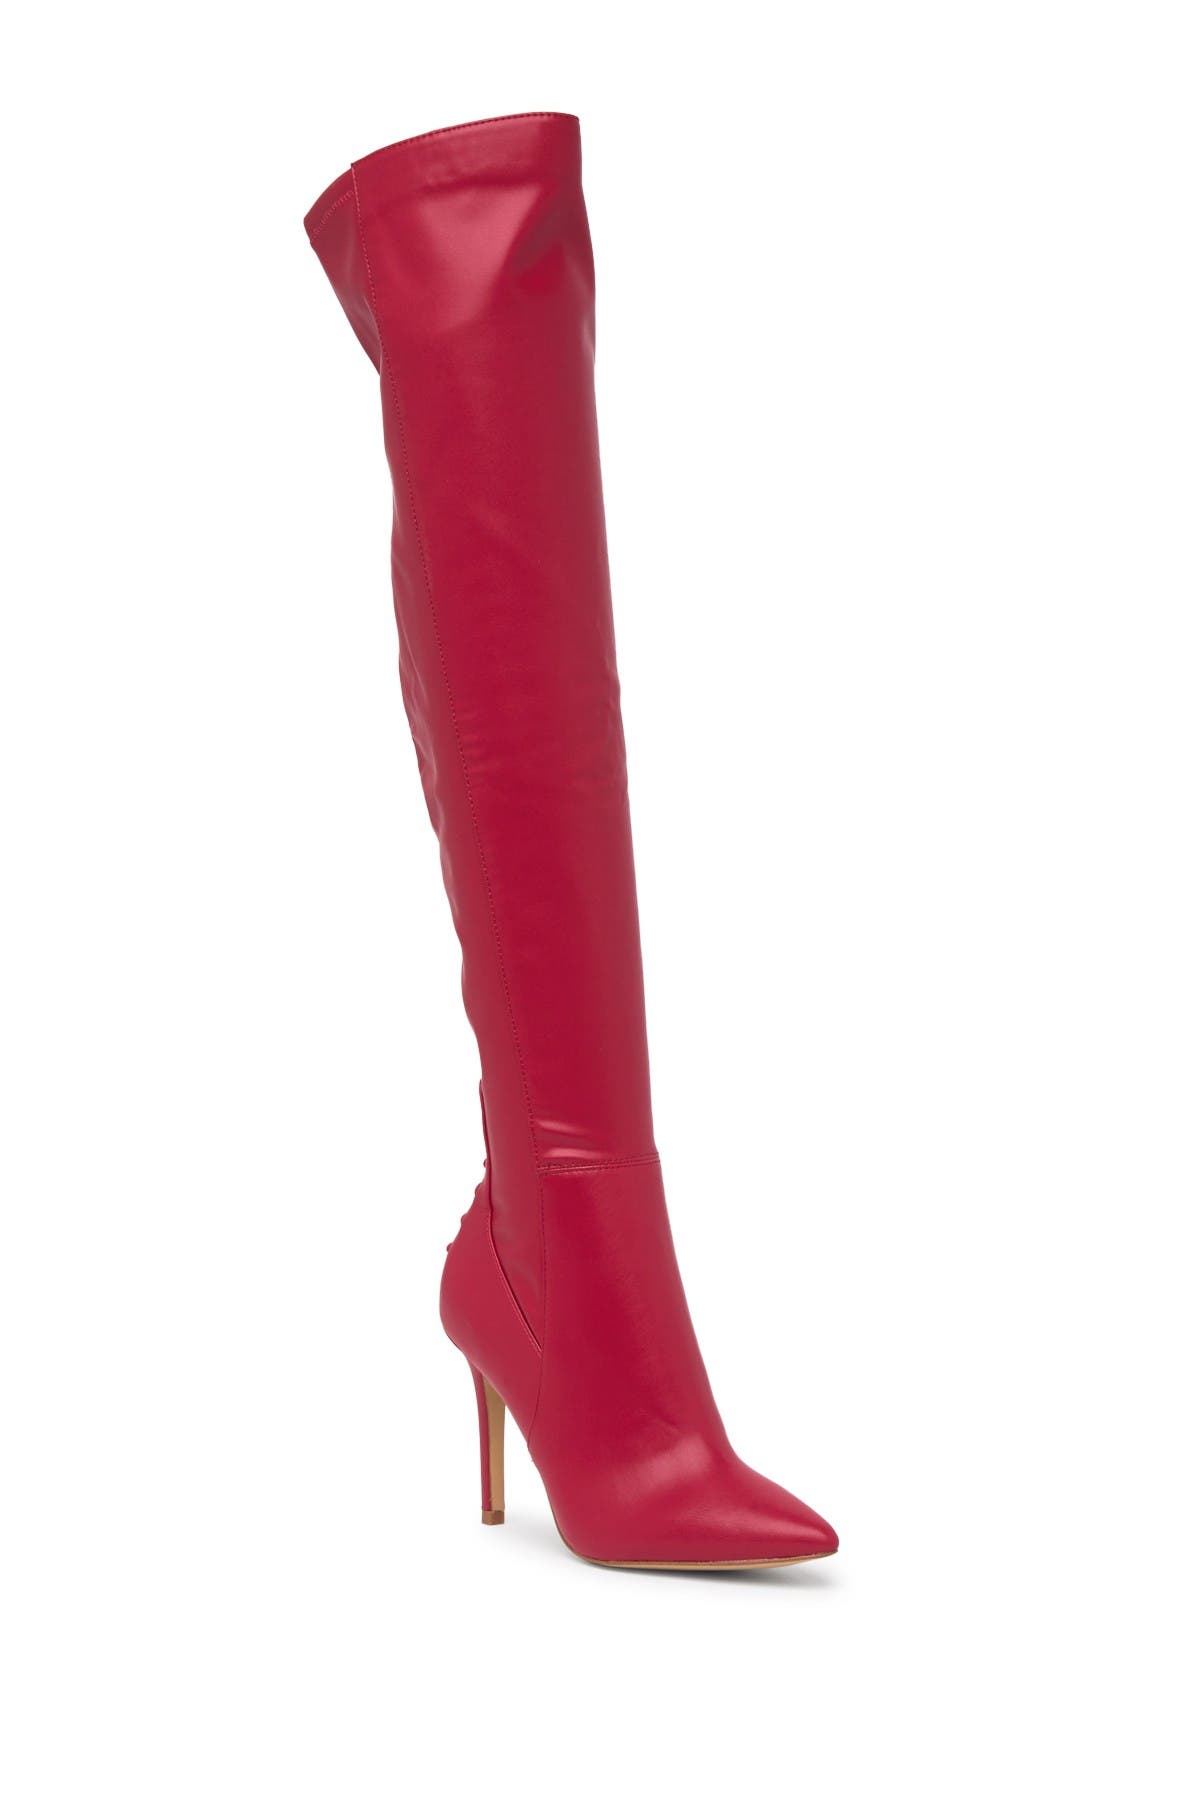 aldo red leather boots